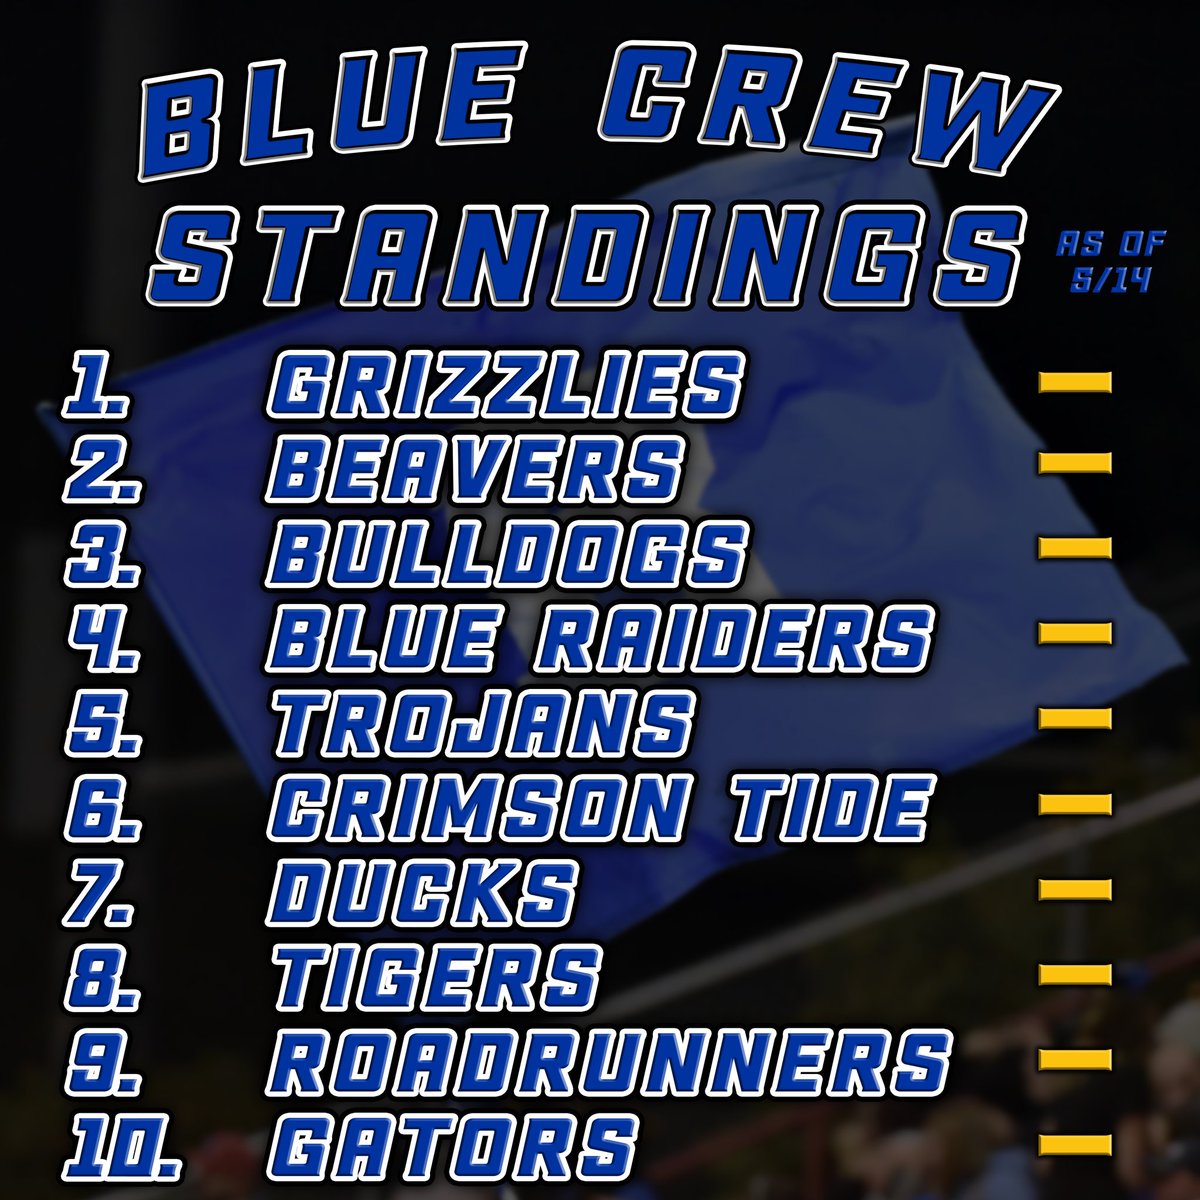 Grizzlies remain on top of this week's updated Blue Crew standings and somehow.... NOBODY moved anywhere! #WeAreBothell | #BleedBlue